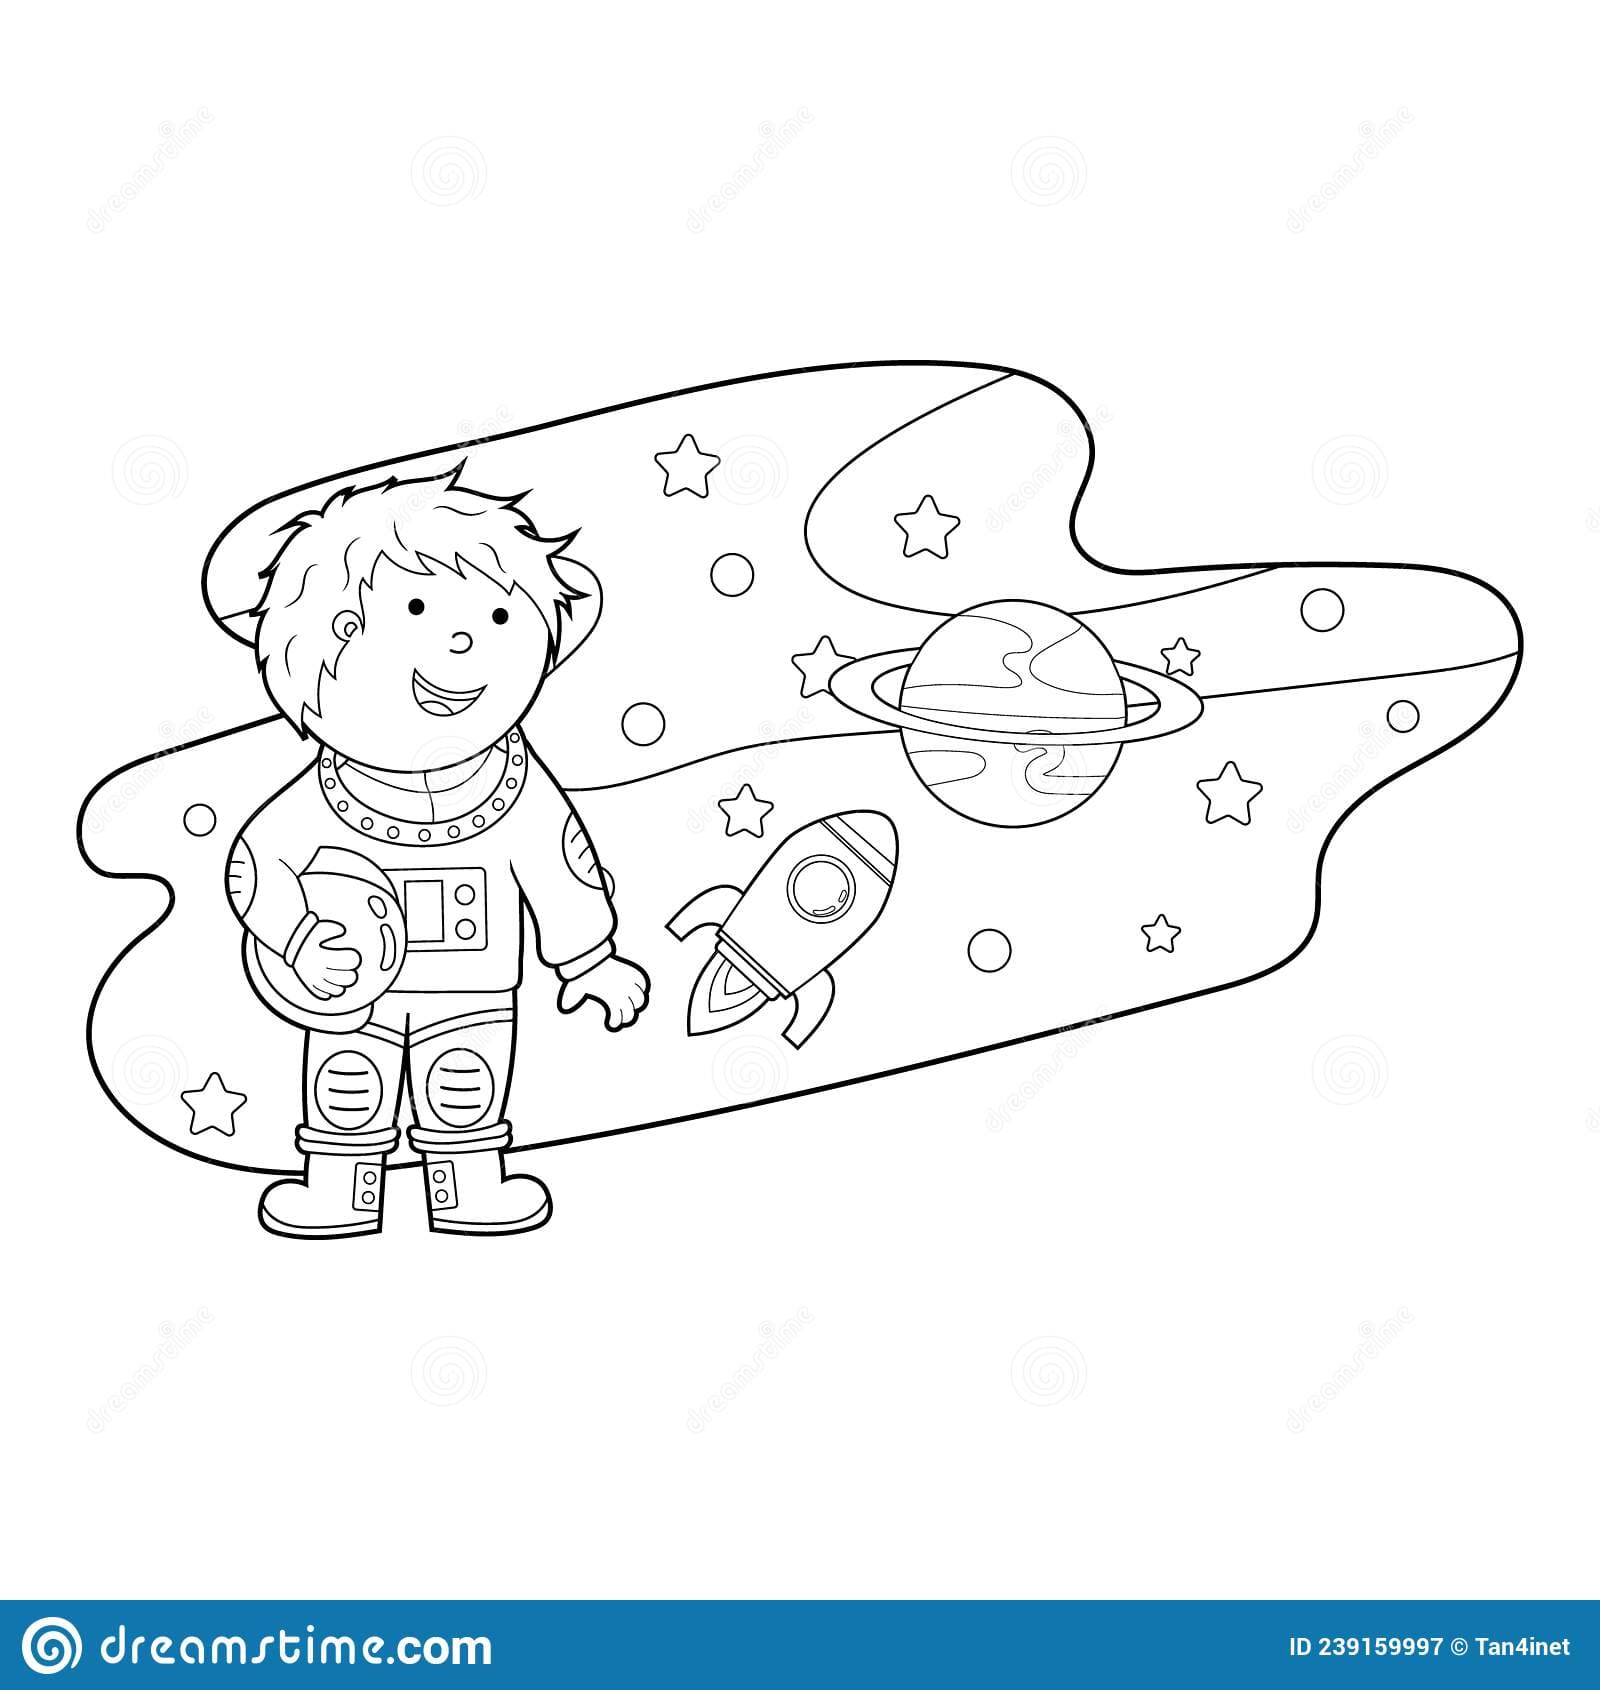 Color a cartoon illustration of an astronaut in space Coloring Page